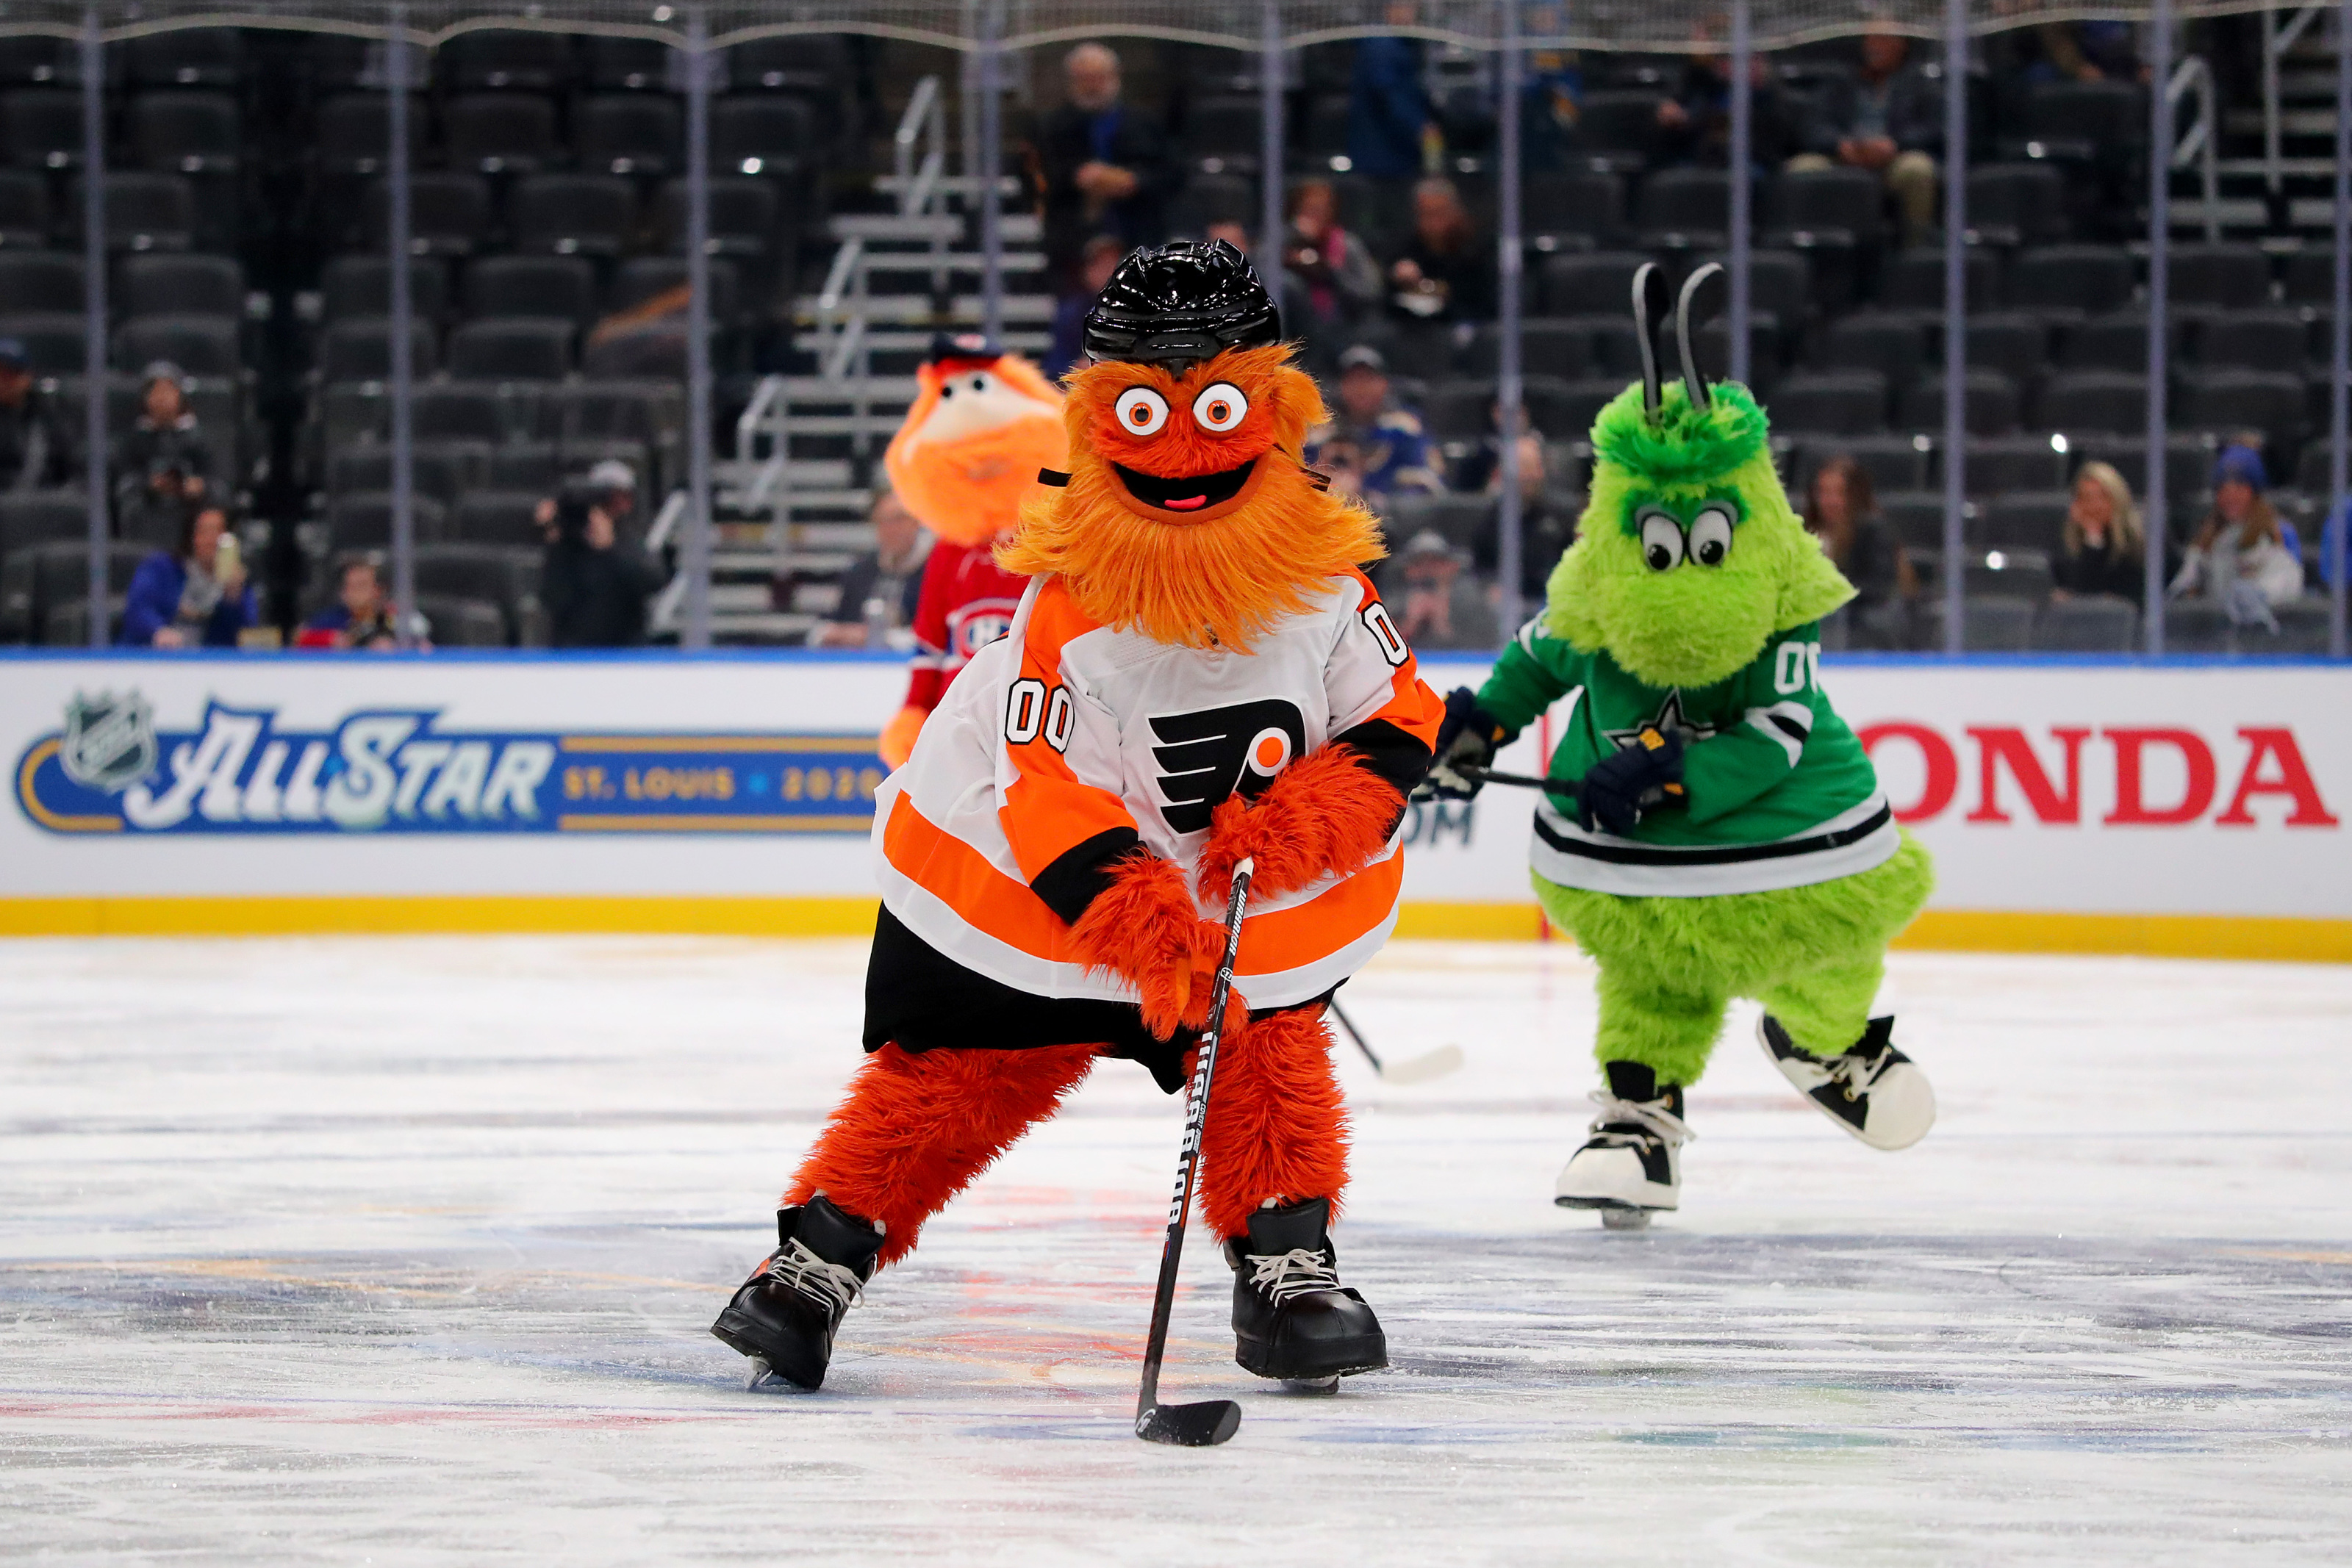 Flyers Organization Benefitting from Loveable Presence of Gritty